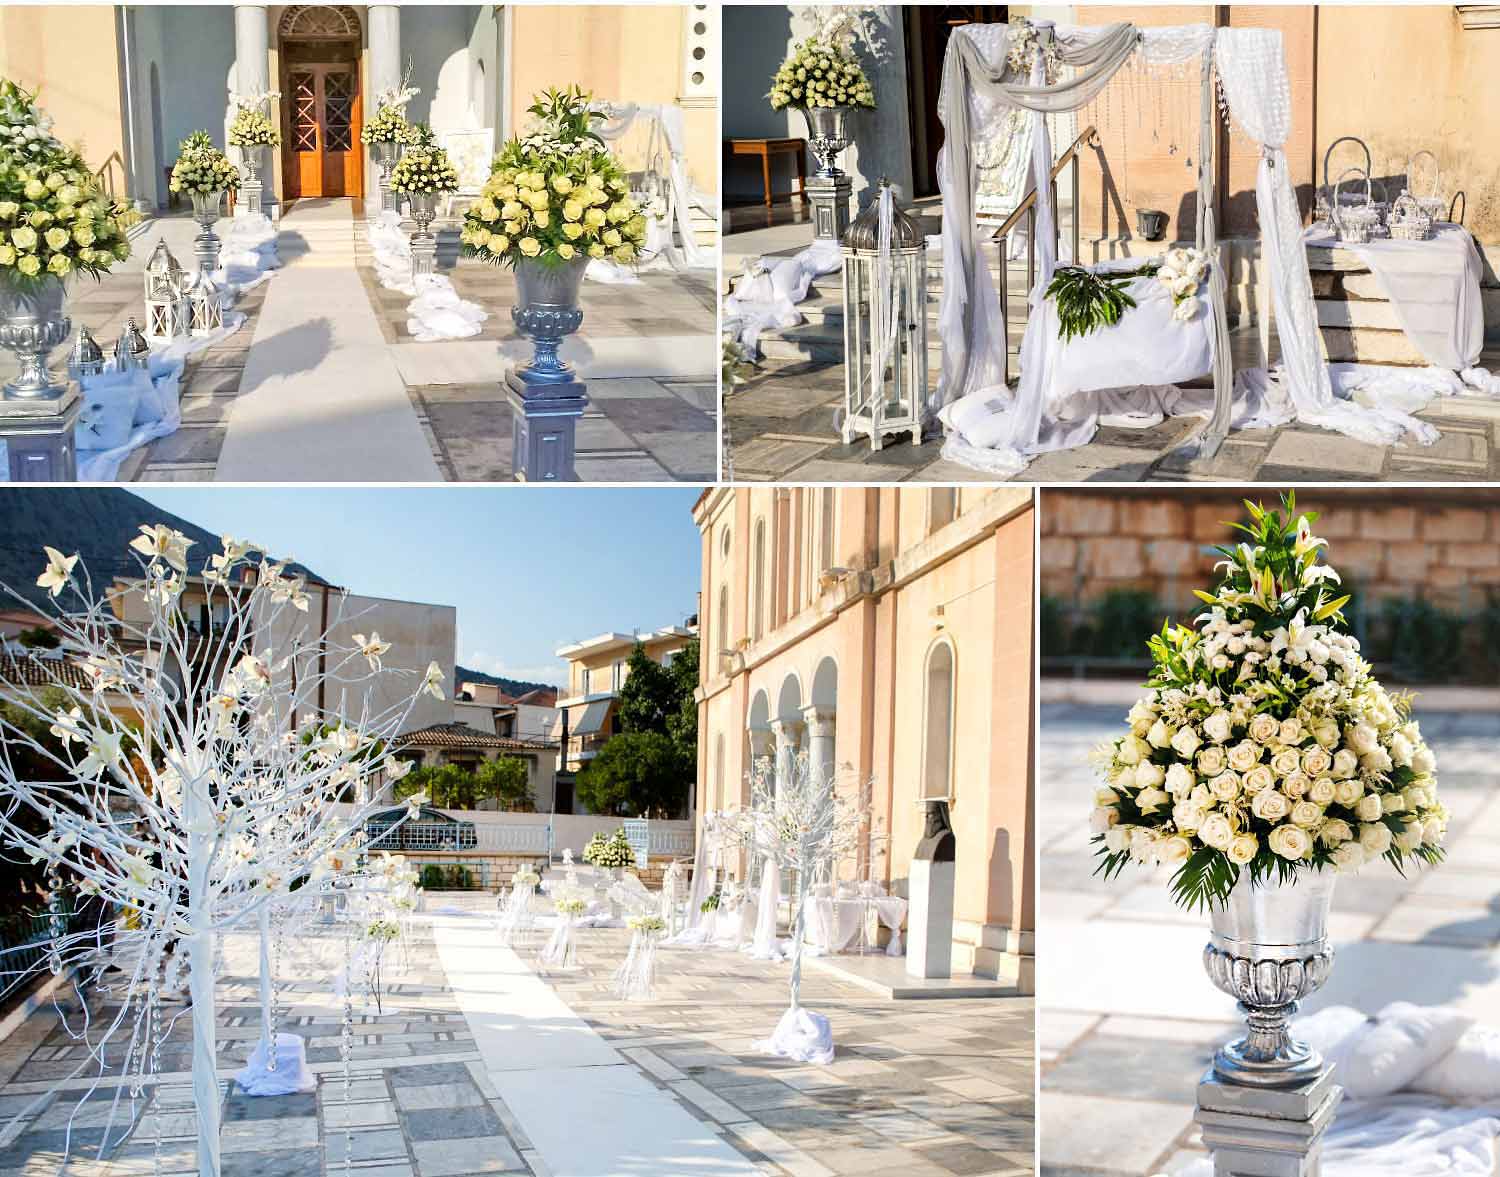 Luxurious Wedding in an Awesome Style | Rogdaki Events Trademark Greece